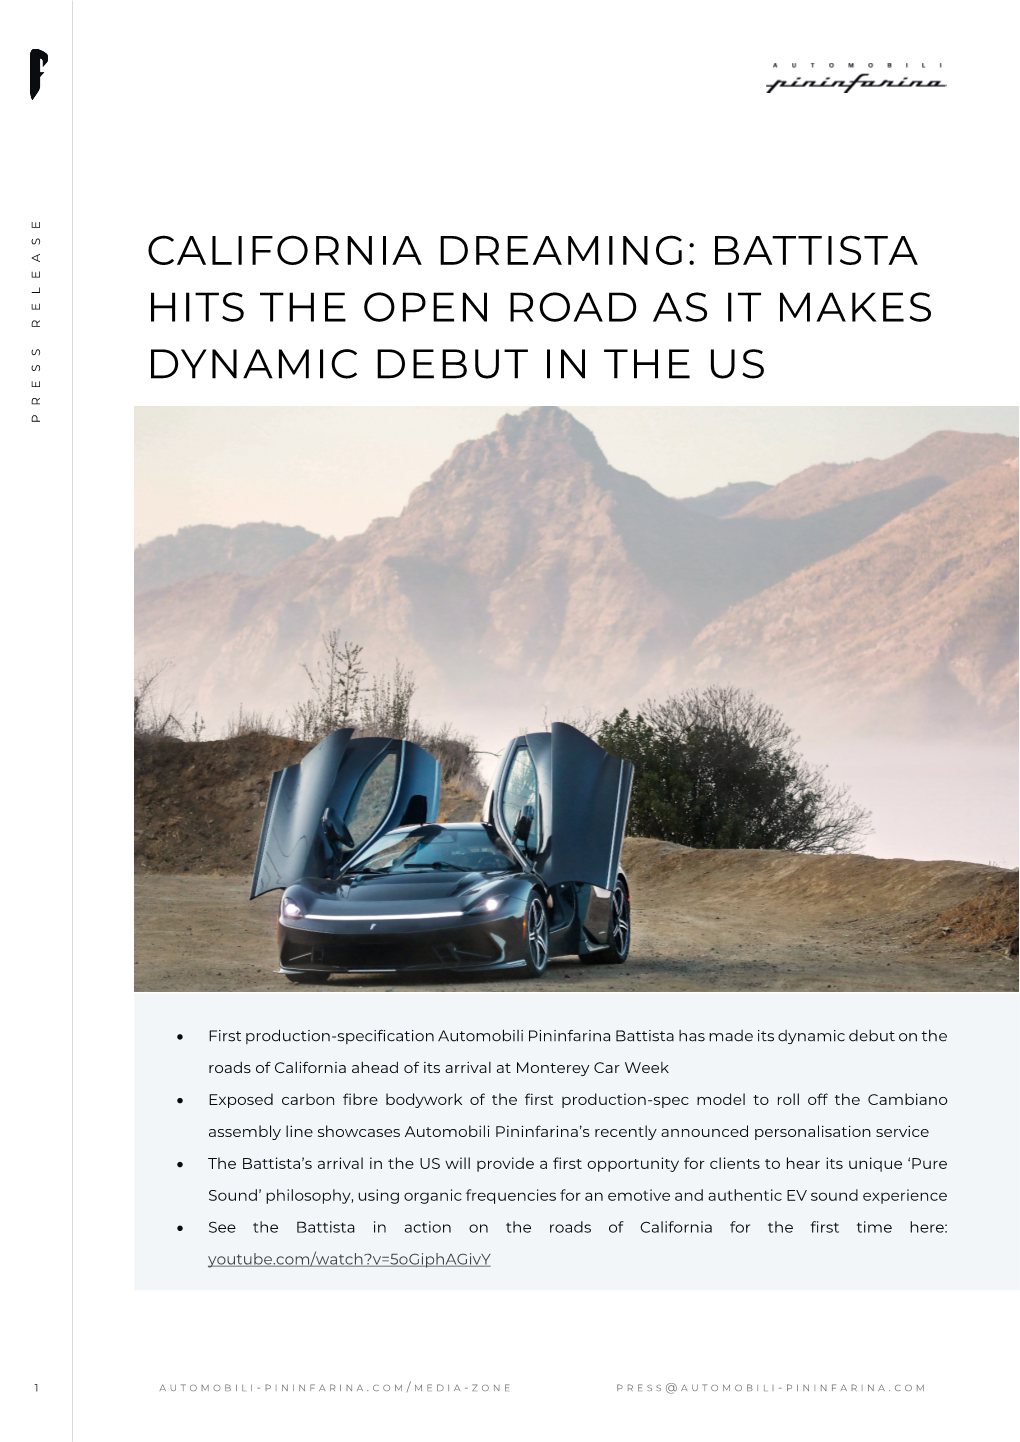 Battista Hits the Open Road As It Makes Dynamic Debut in the Us Press Release Press